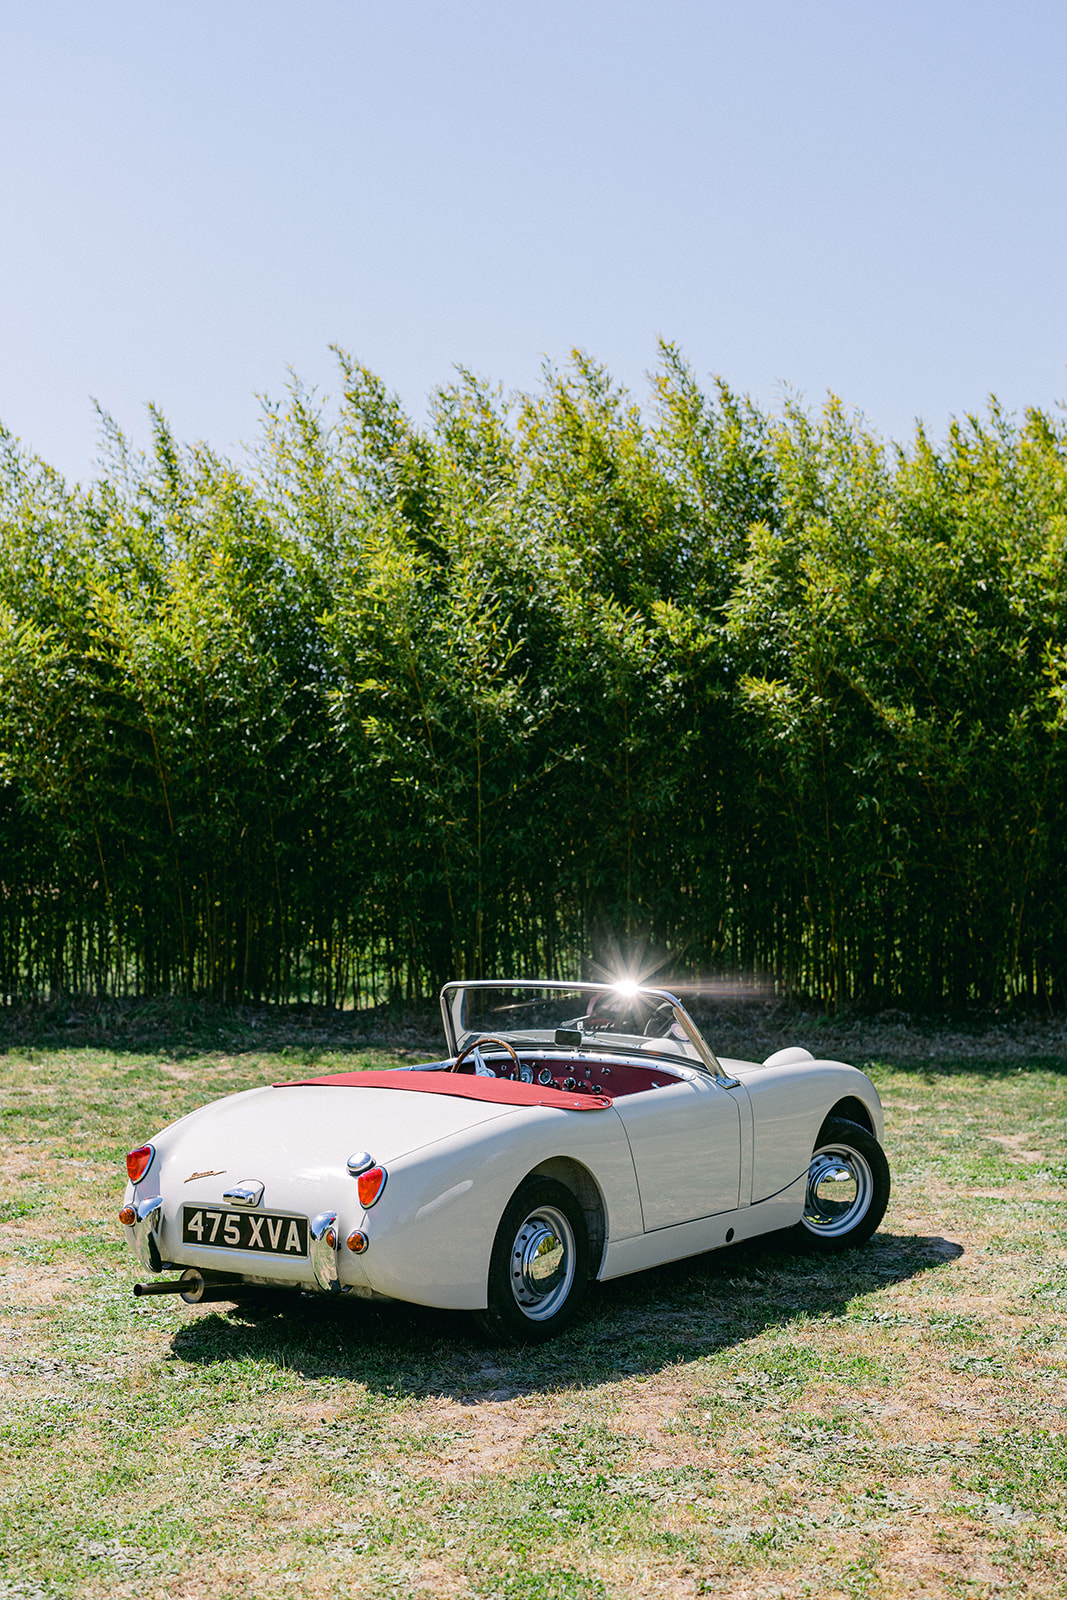 A view of the Provence Classics 1959 Austin Healey Sprite